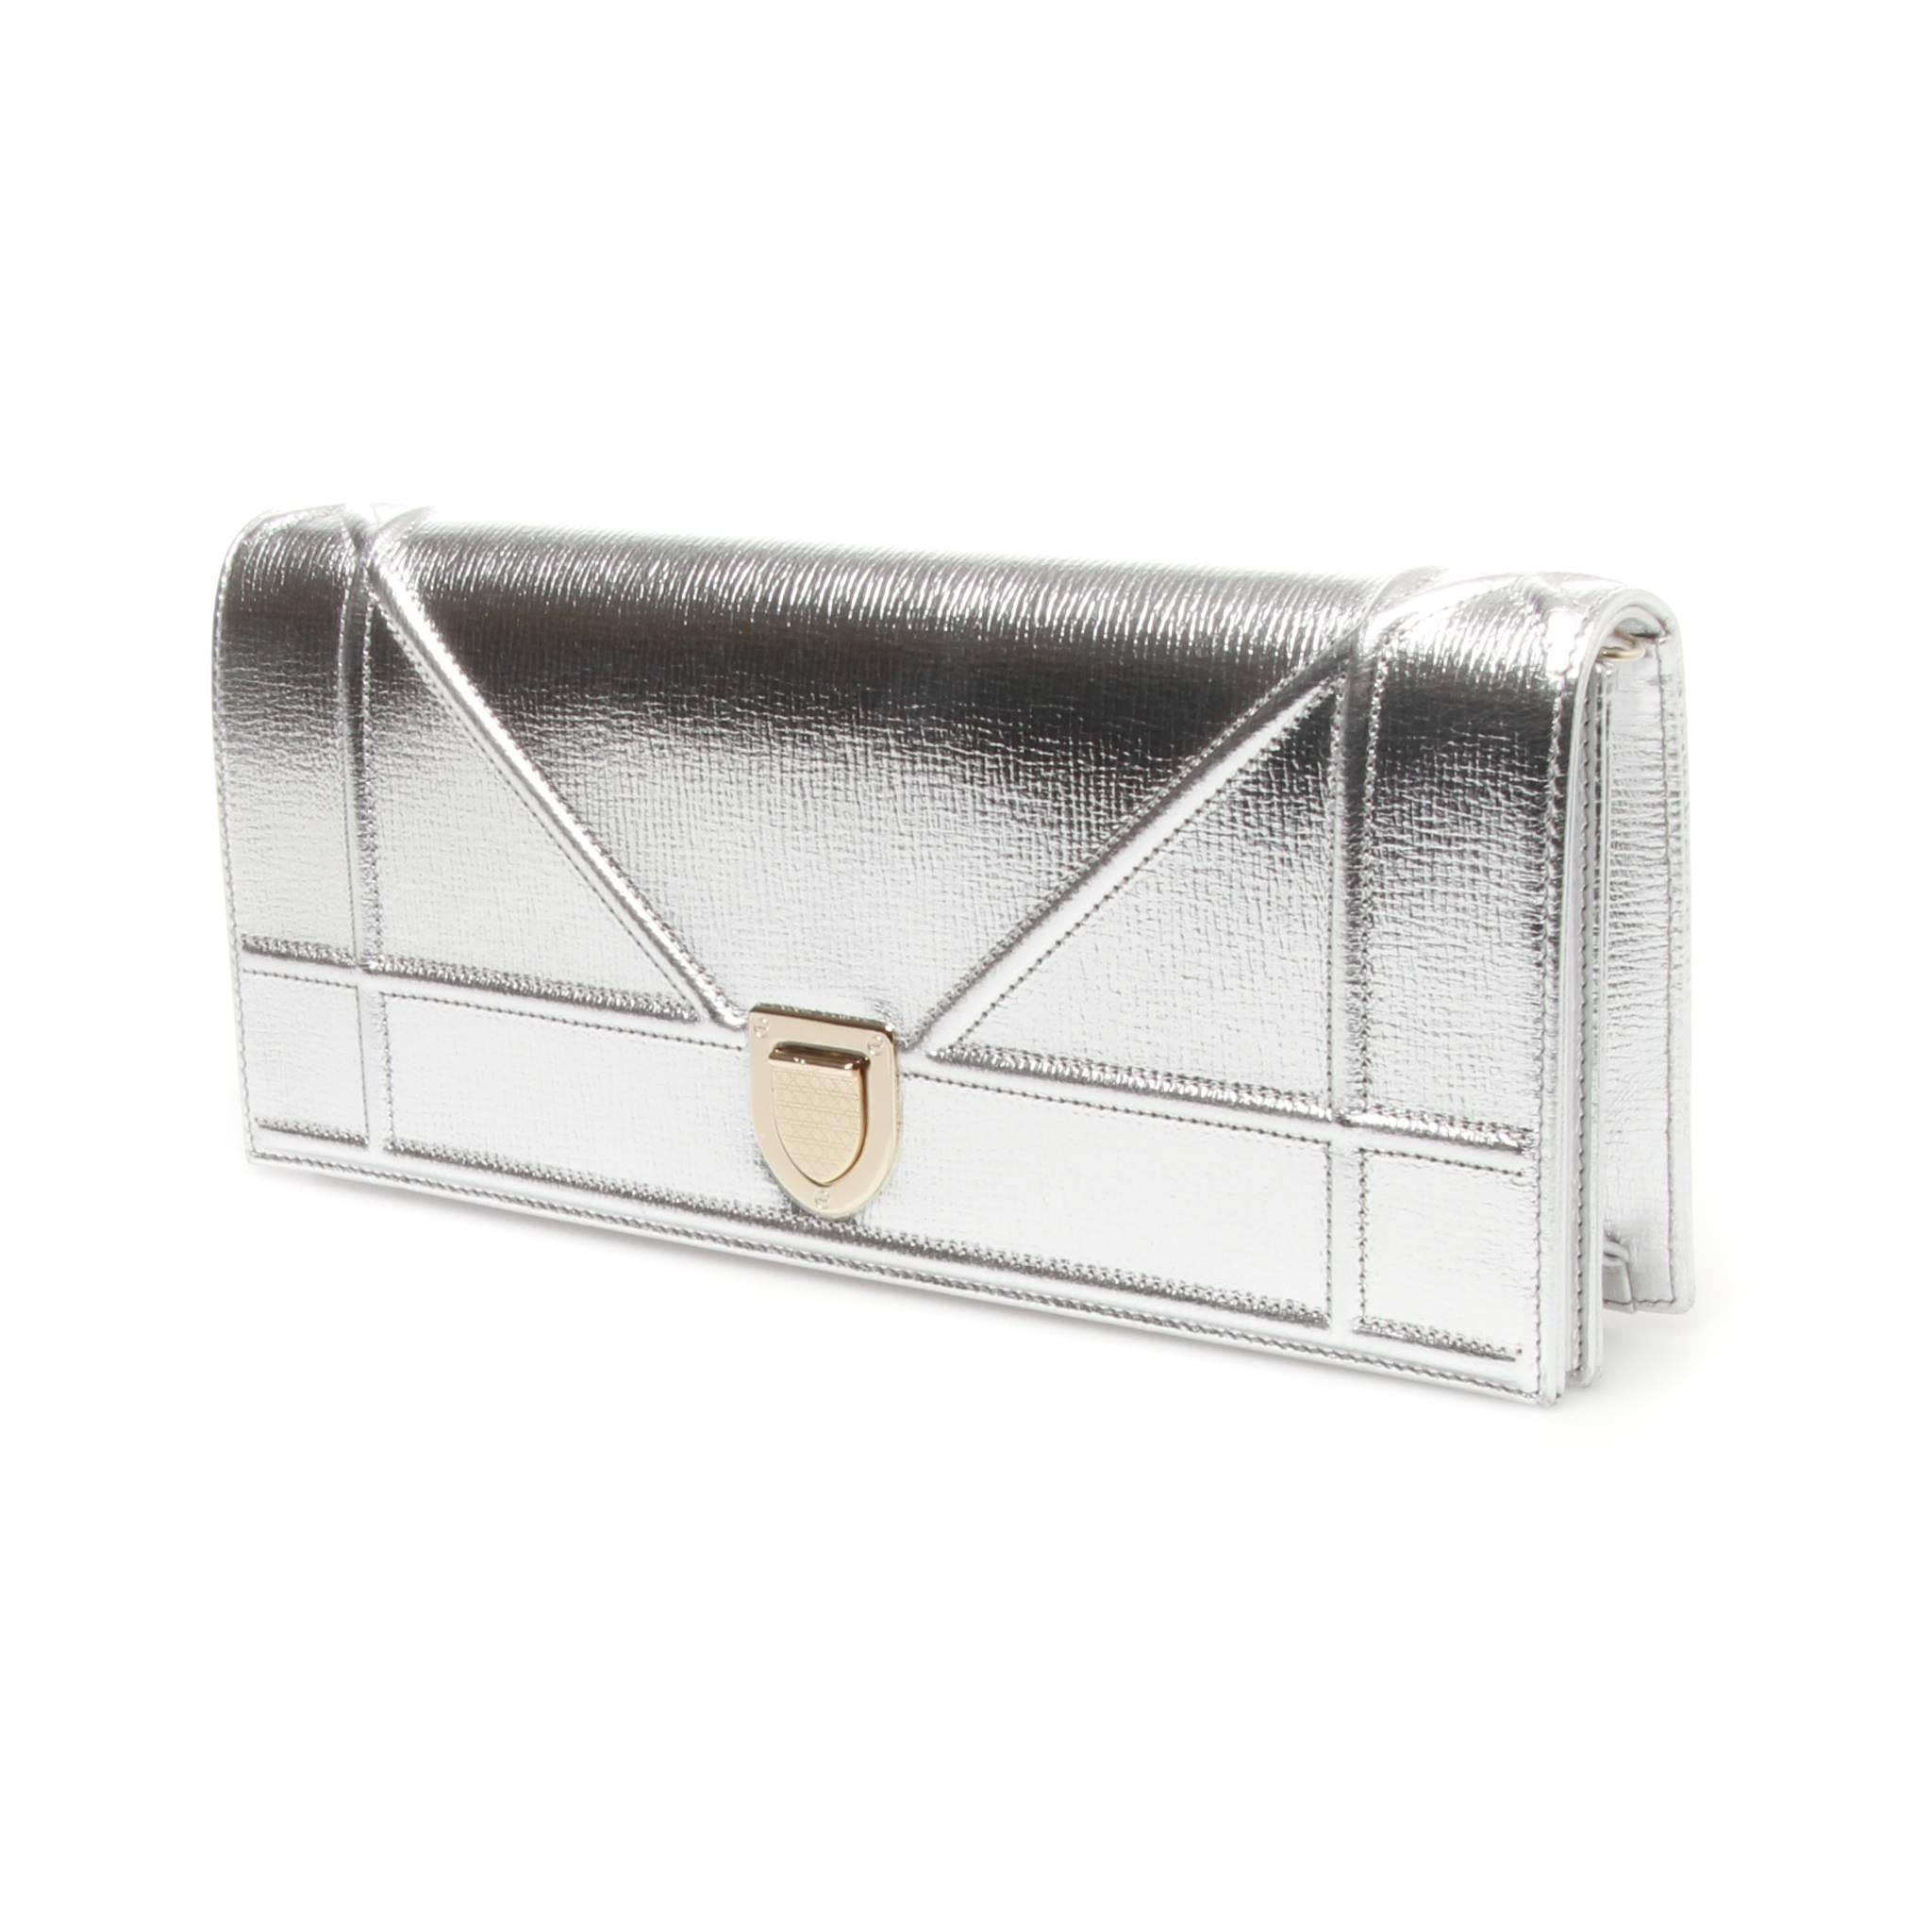 Metallic silver leather Christian Dior Diorama clutch with contrasting gold-tone hardware hardware, pink grosgrain lining, single slit pocket at interior wall and push-lock closure at front flap. Comes with detachable chain to be worn cross body.